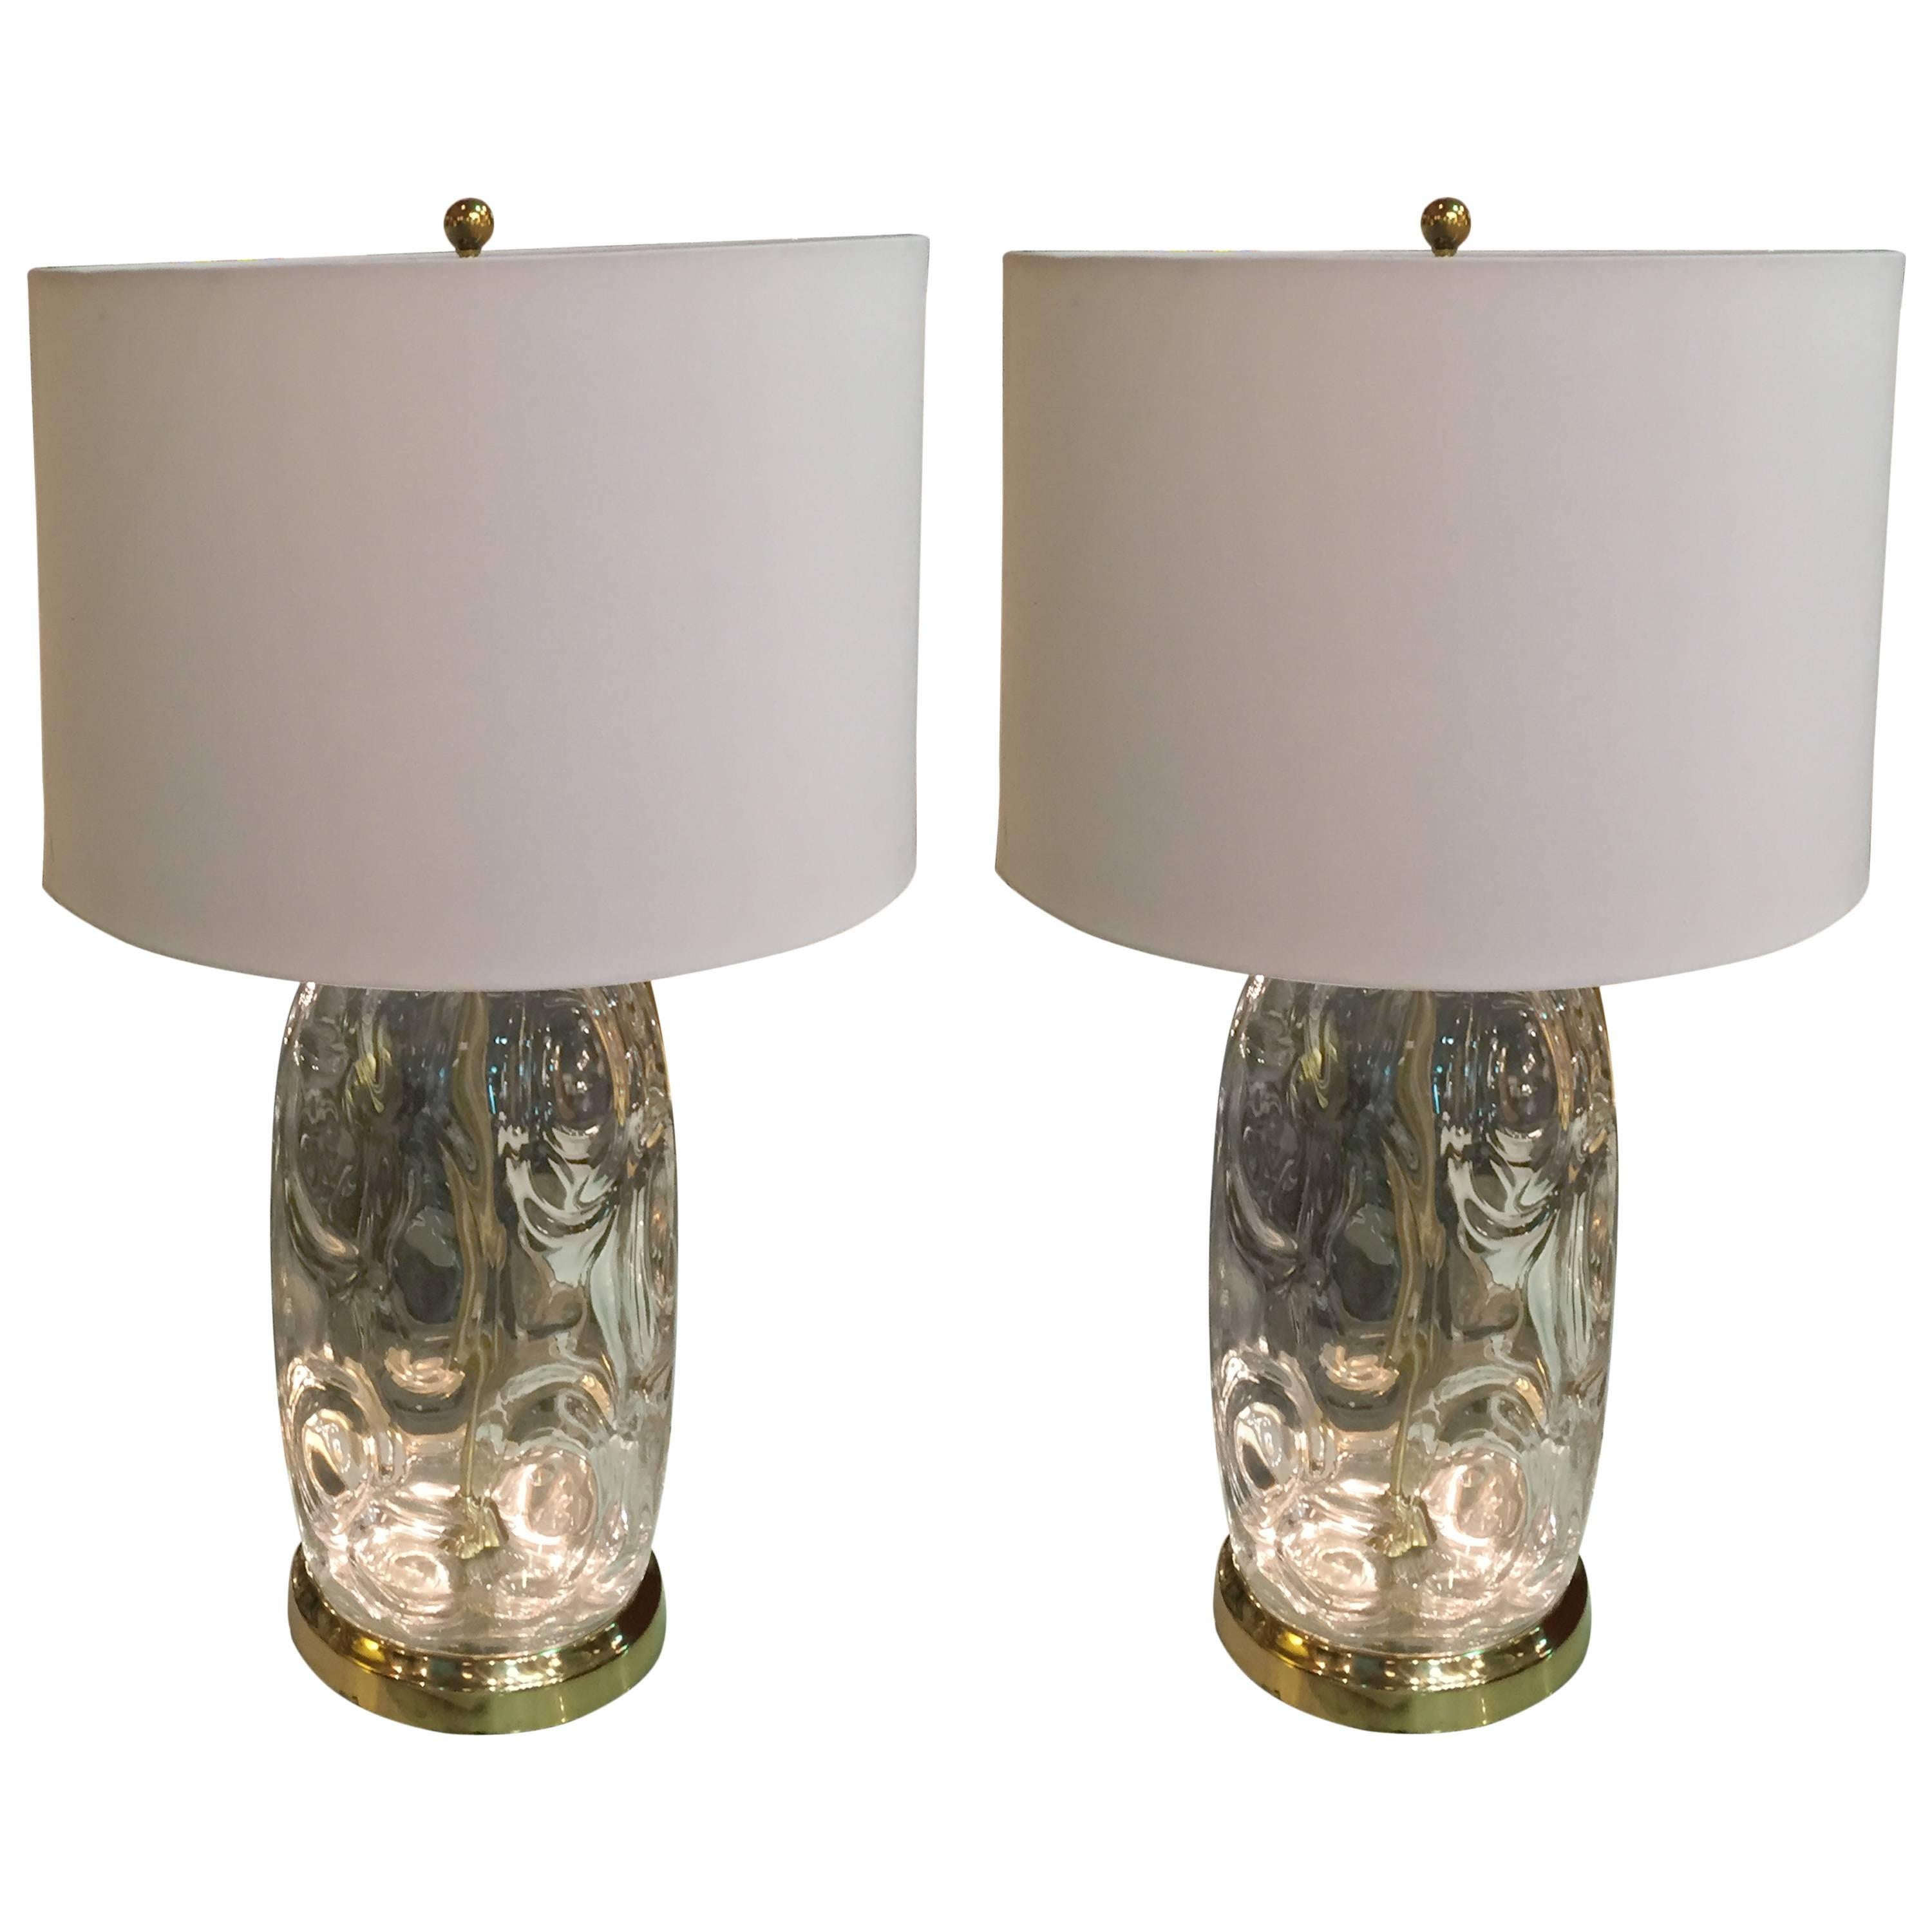 Pair of Mid-20th Century Handblown Clear Glass Table Lamps